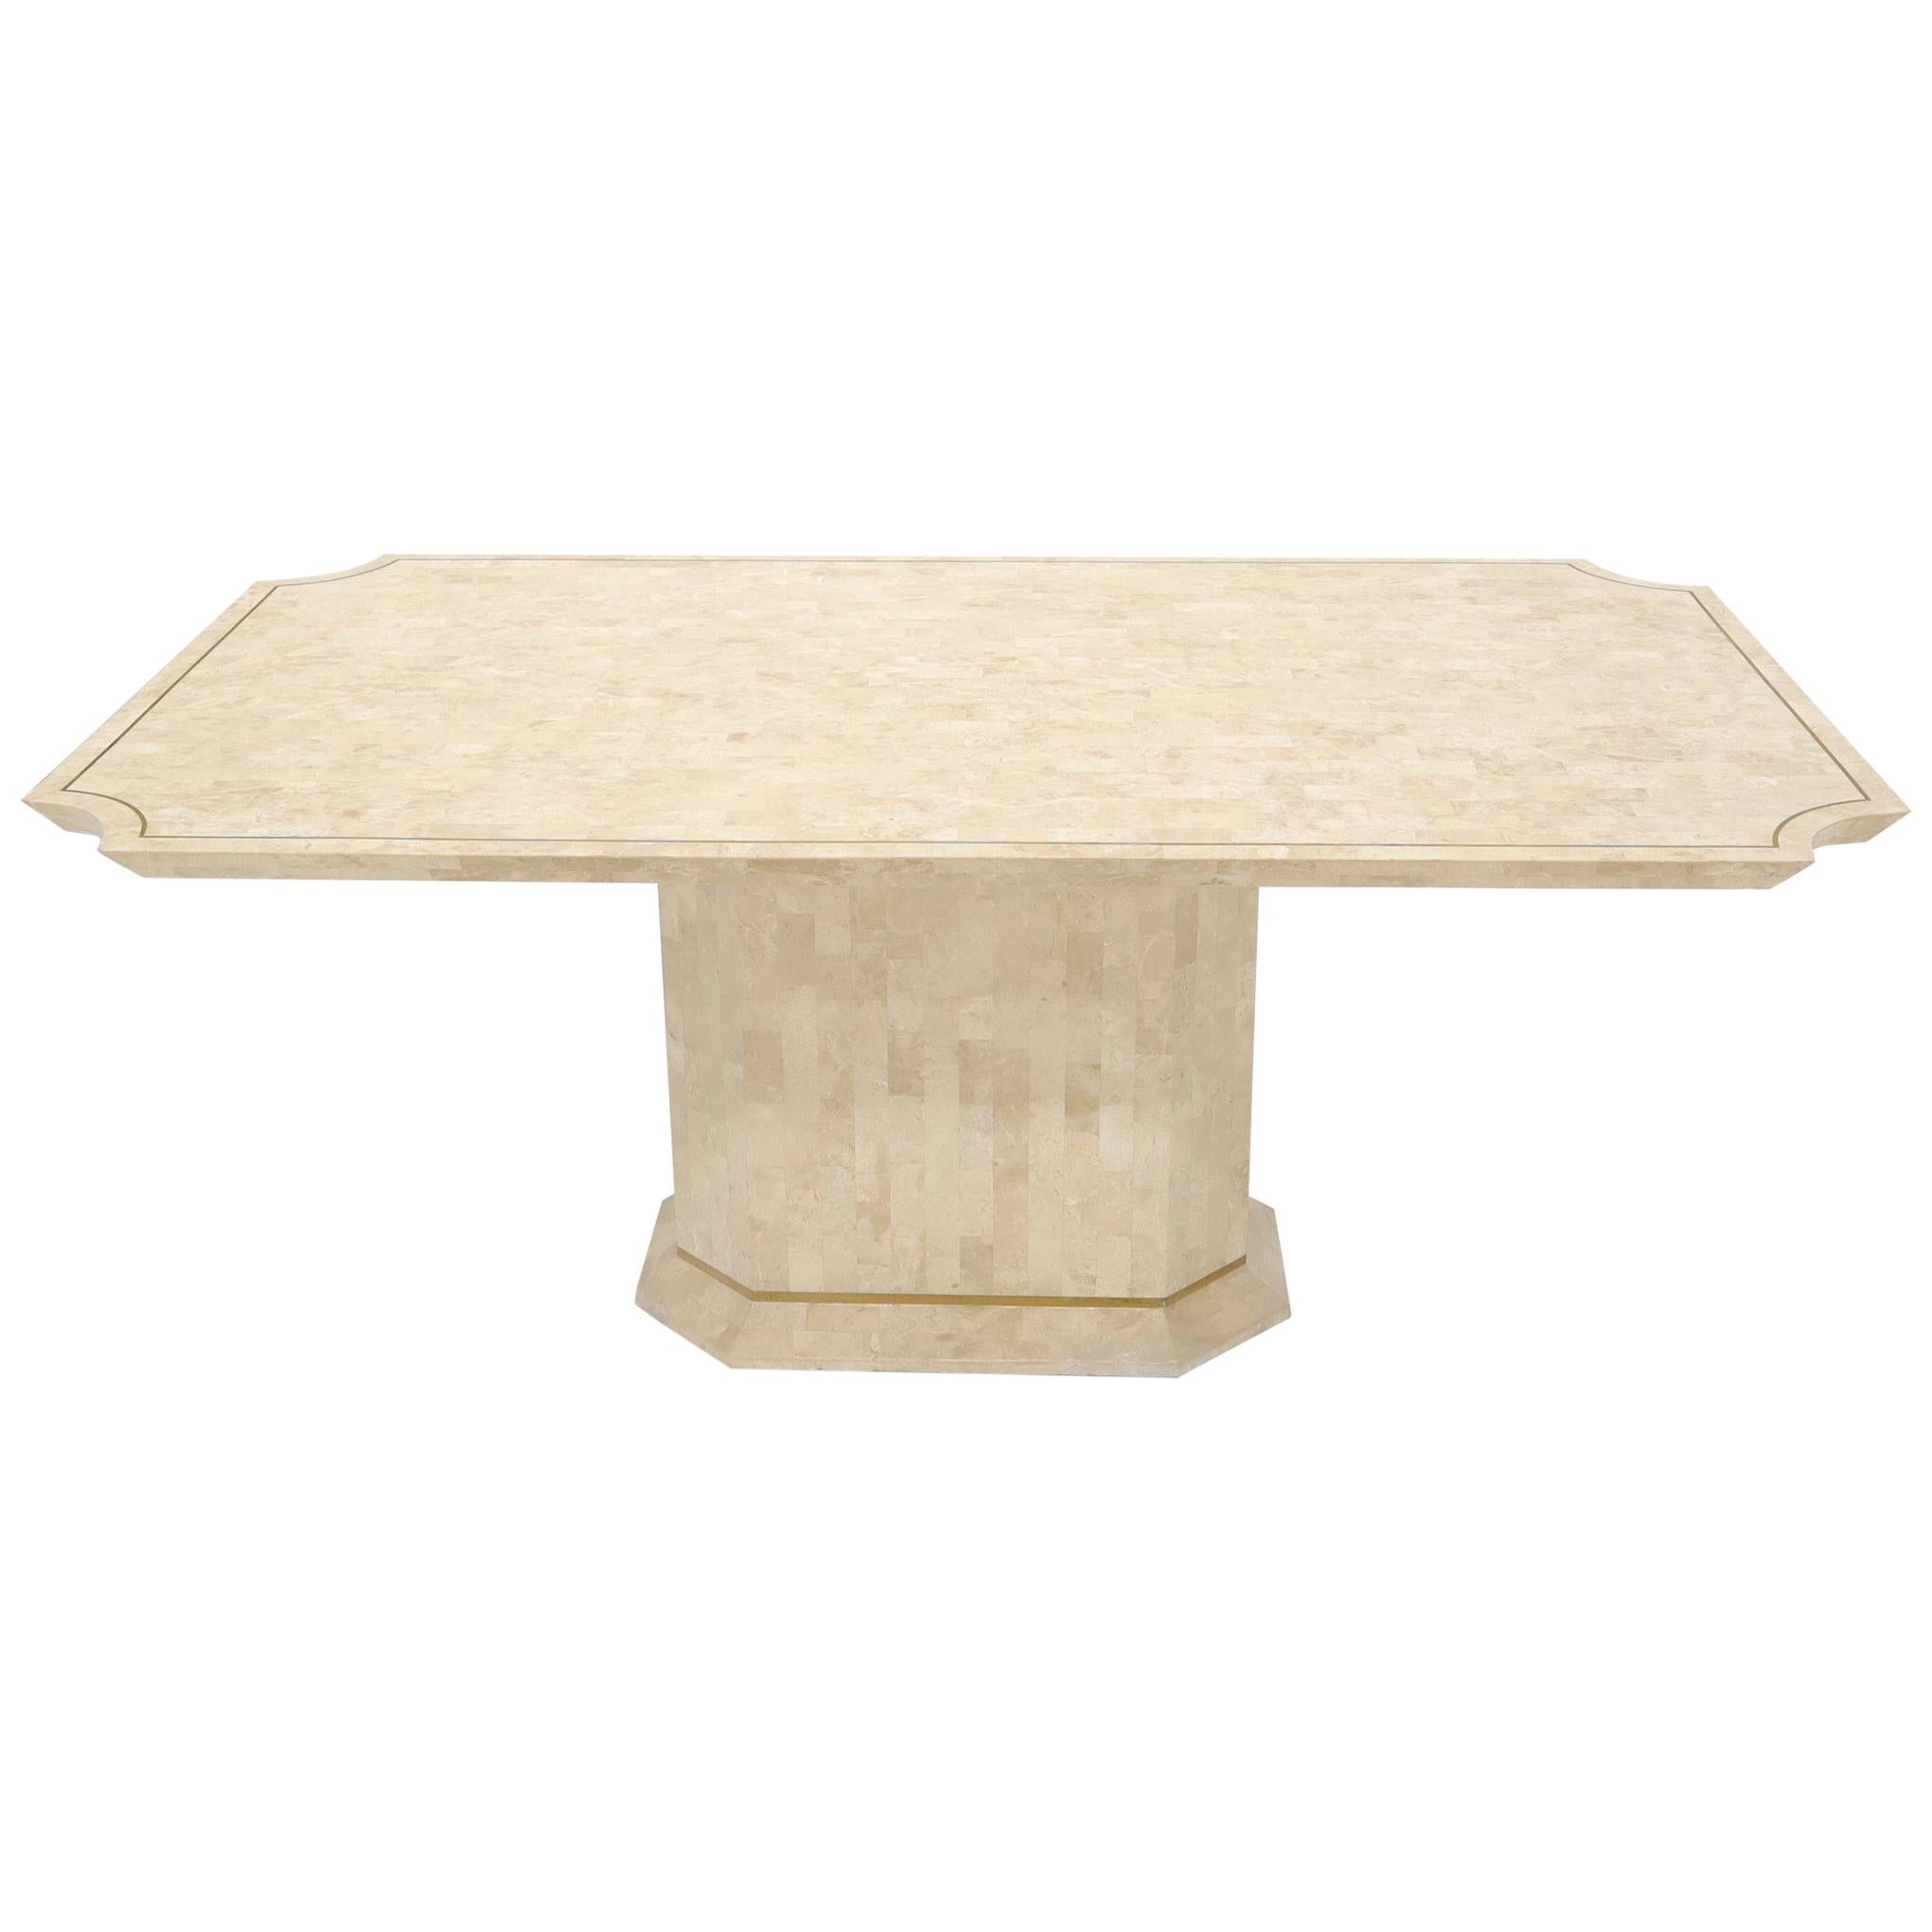 Tessellated Stone Tile Brass Inlay Single Pedestal Rectangle Dining Table